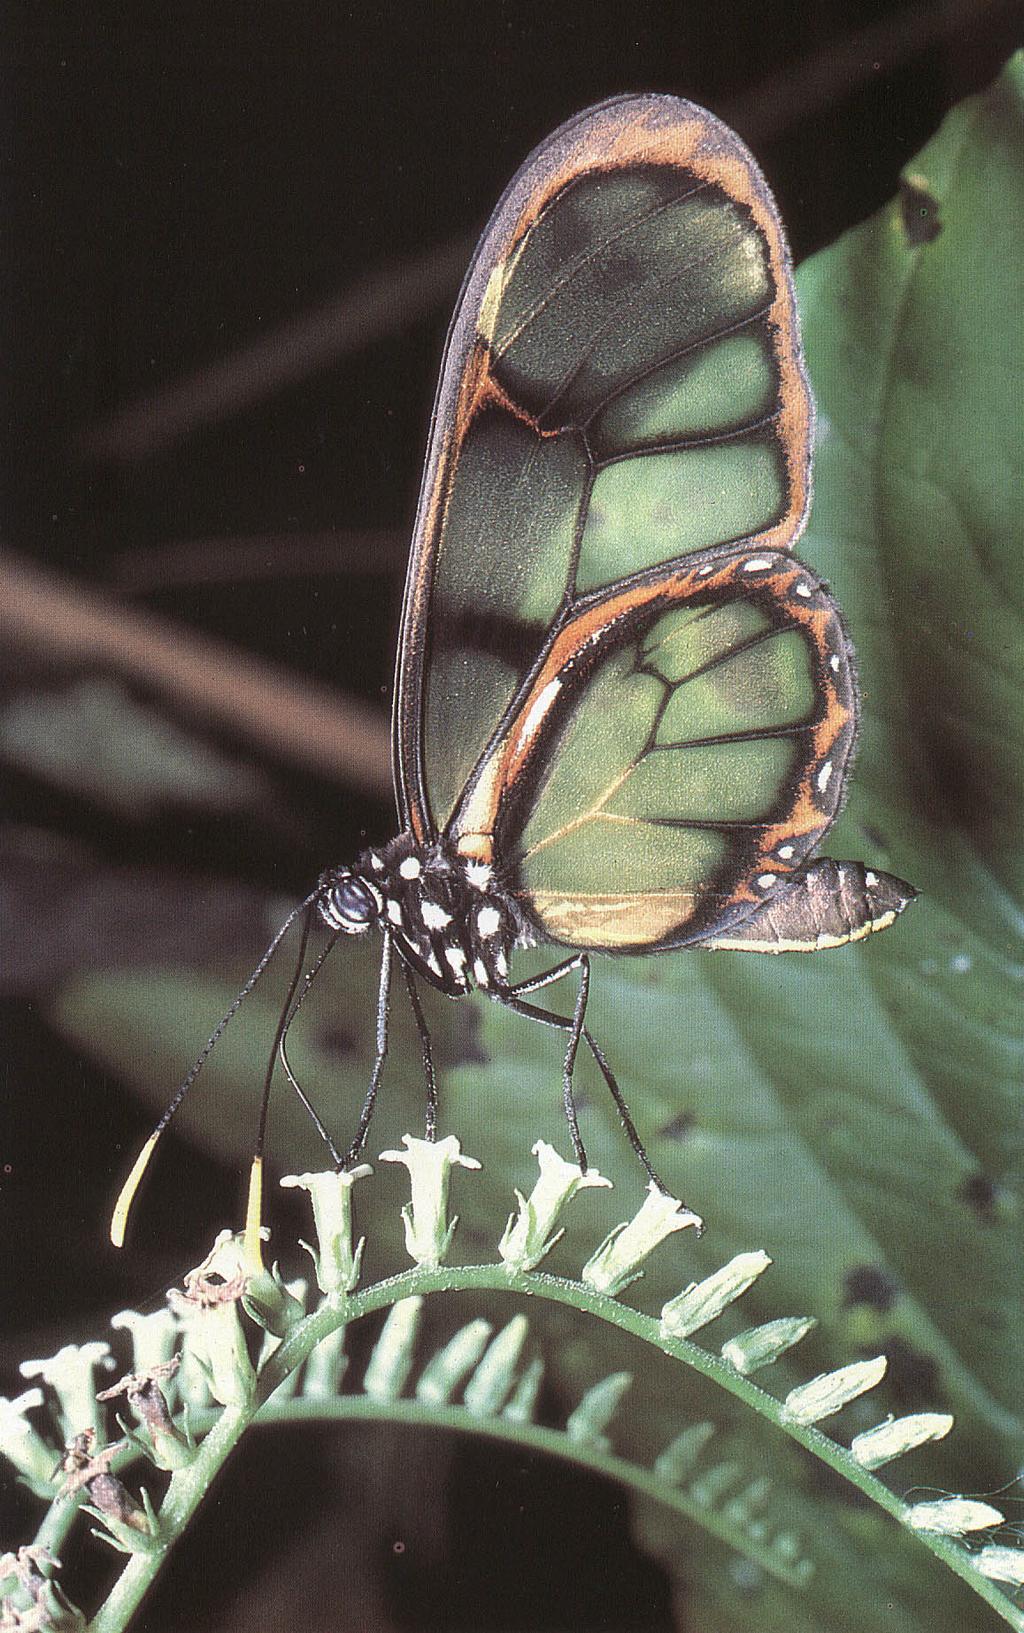 Nectar and color attract butterflies: Dircenna dero butterfly in Peru (Living Earth Foundation 1989.